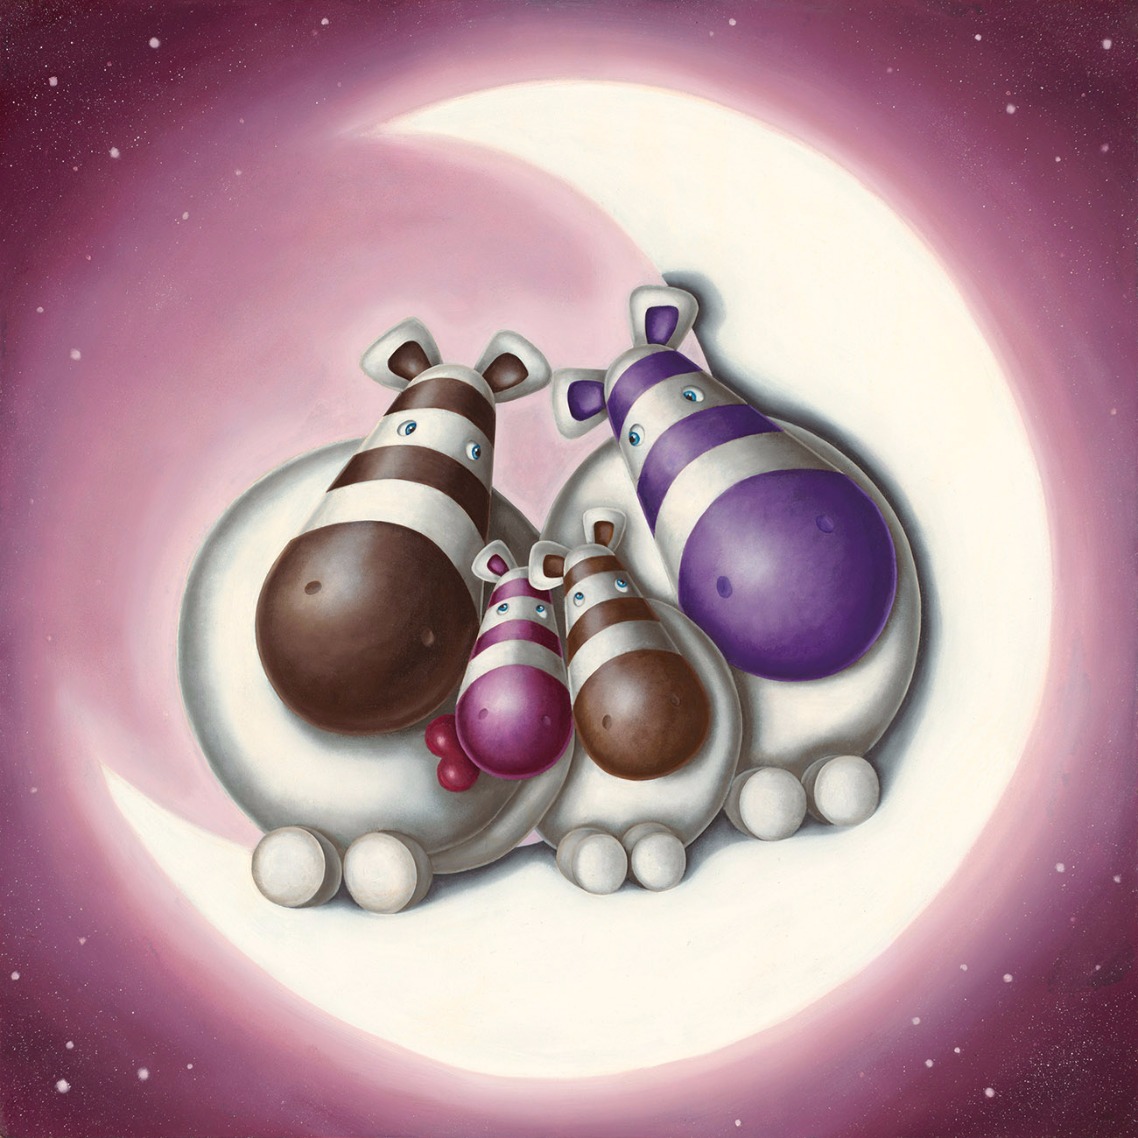 Sweet Dreams are made of this by Peter Smith